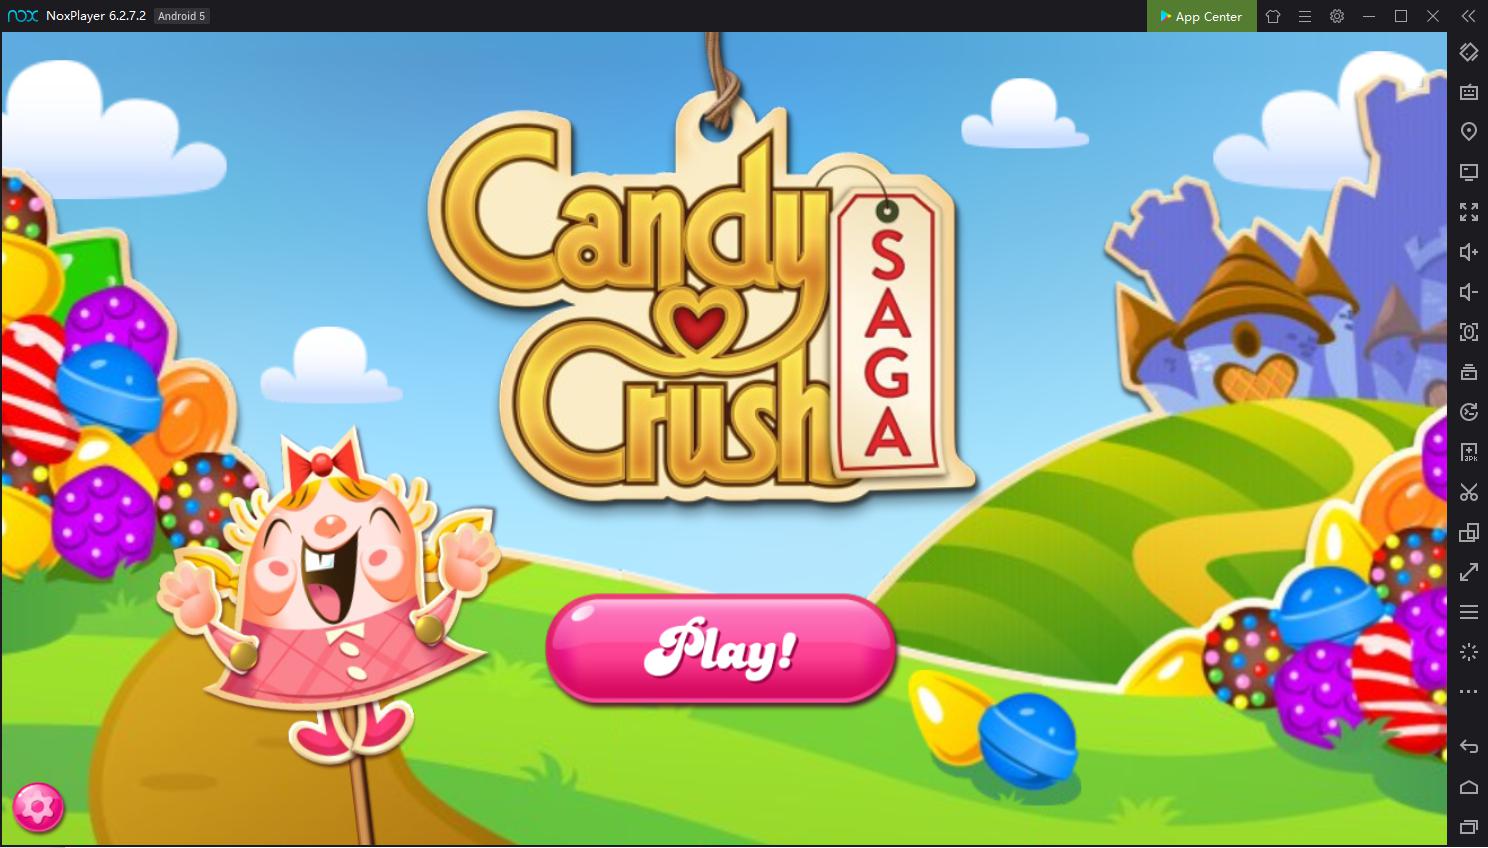 Candy Crush Sega on PC with NoxPlayer: TOP5 cheats, tips and